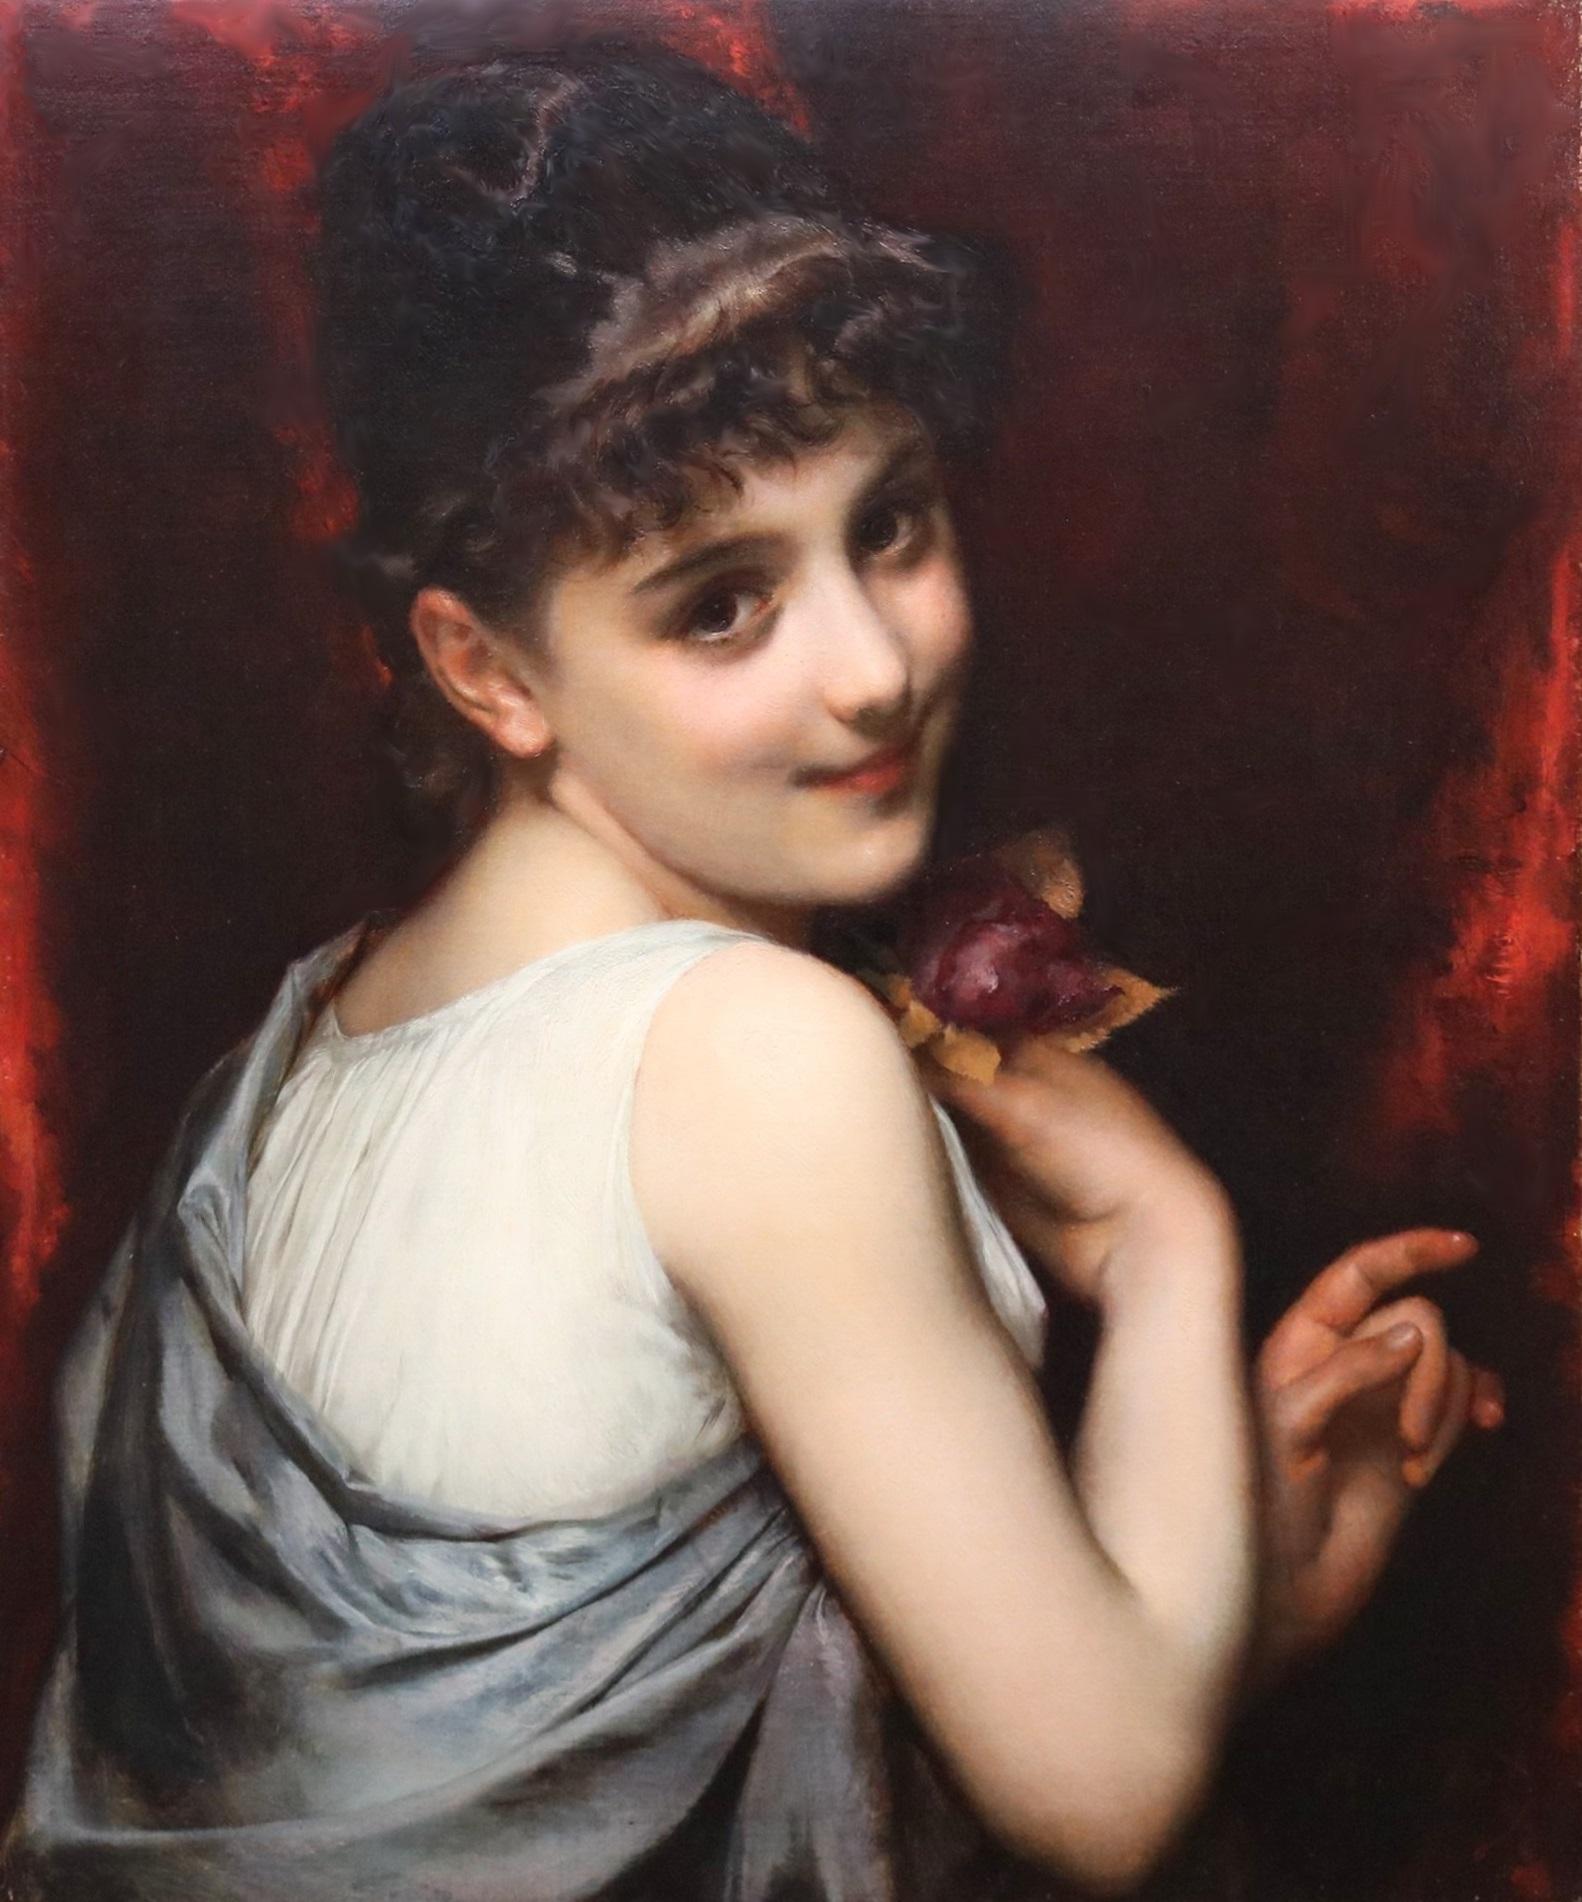 Young Belle Epoque Beauty - 19th Century Oil Painting Portrait of a French Girl 1